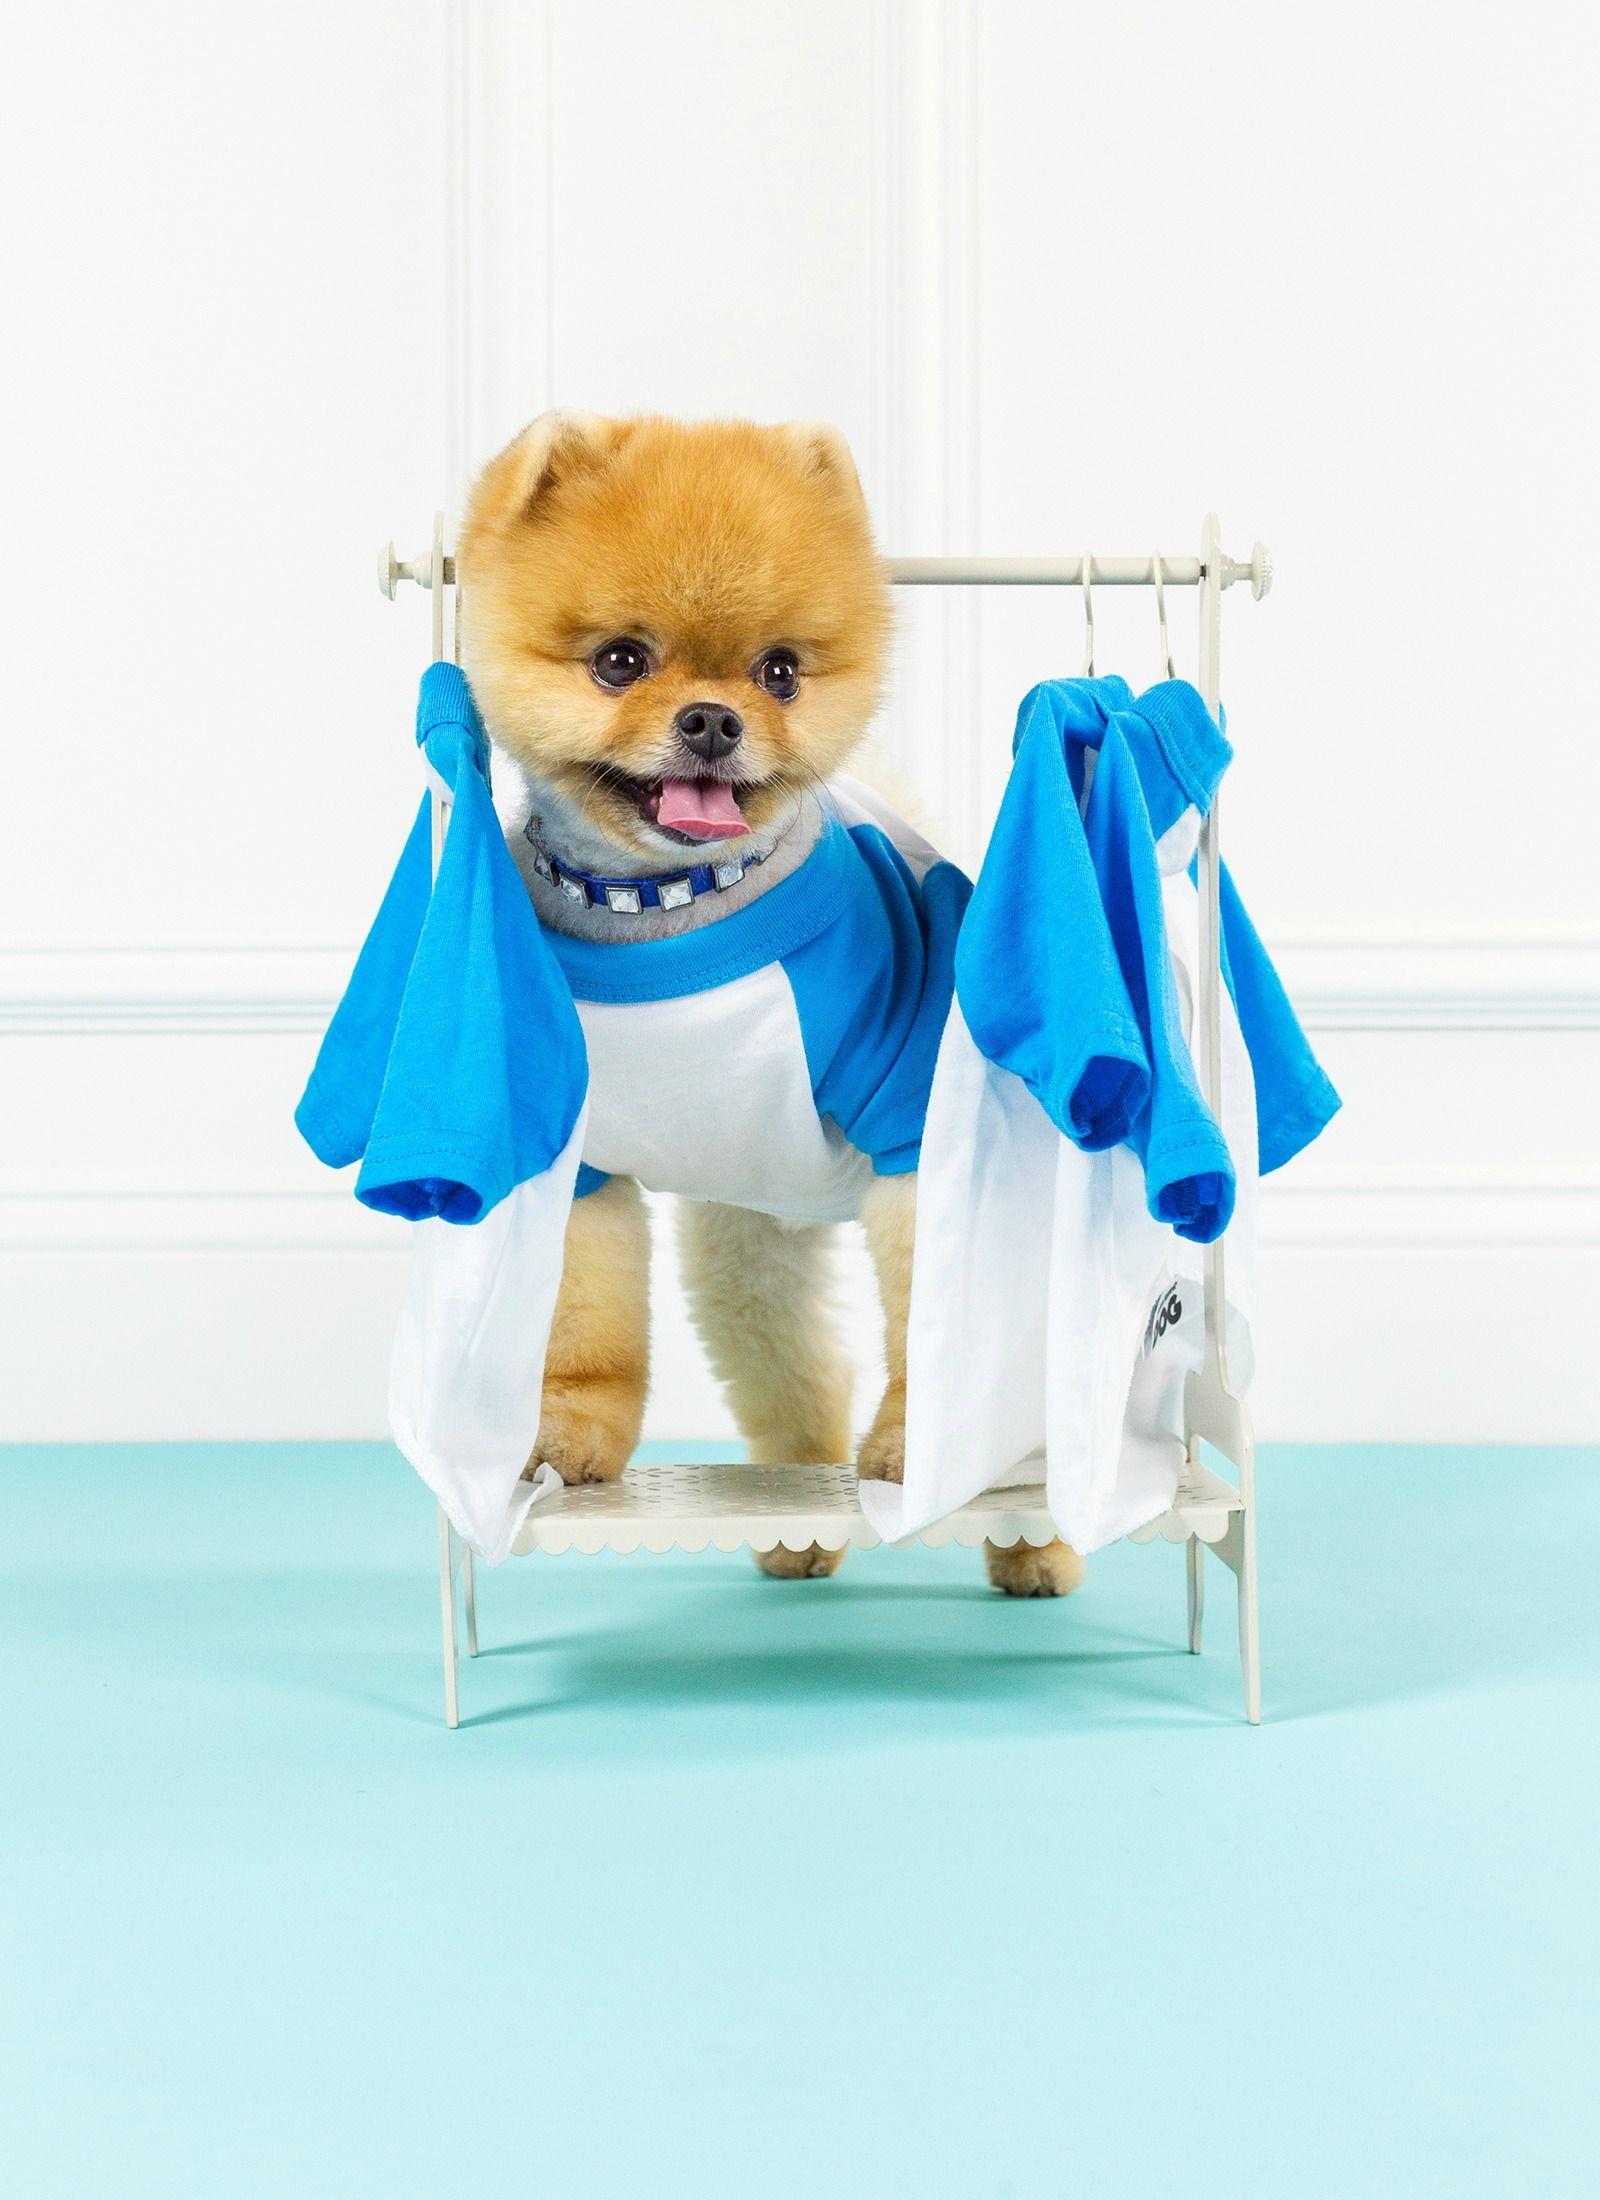 Jiff Pom picking an outfit. -This lil dog's name is Jiffy. dope